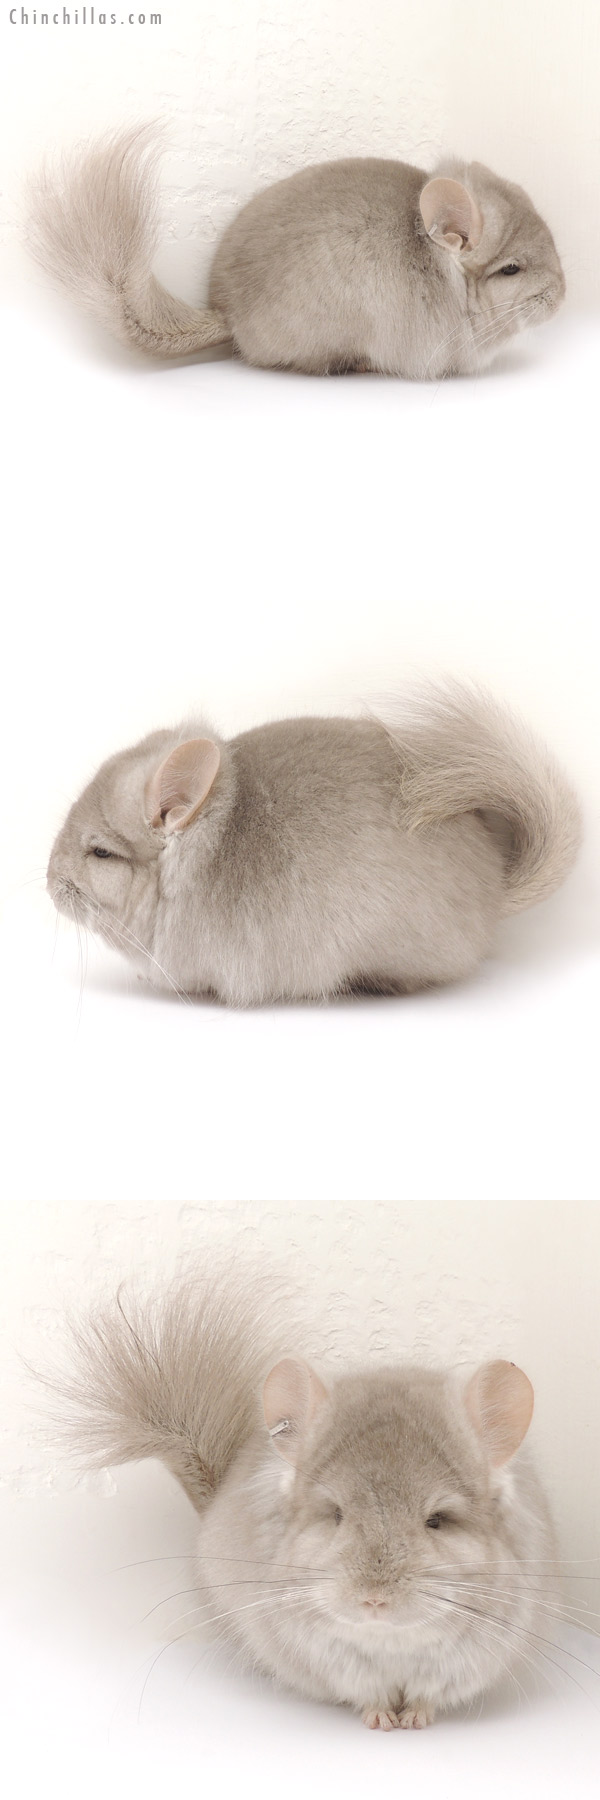 Chinchilla or related item offered for sale or export on Chinchillas.com - 14085 Exceptional Beige  Royal Persian Angora Male Chinchilla